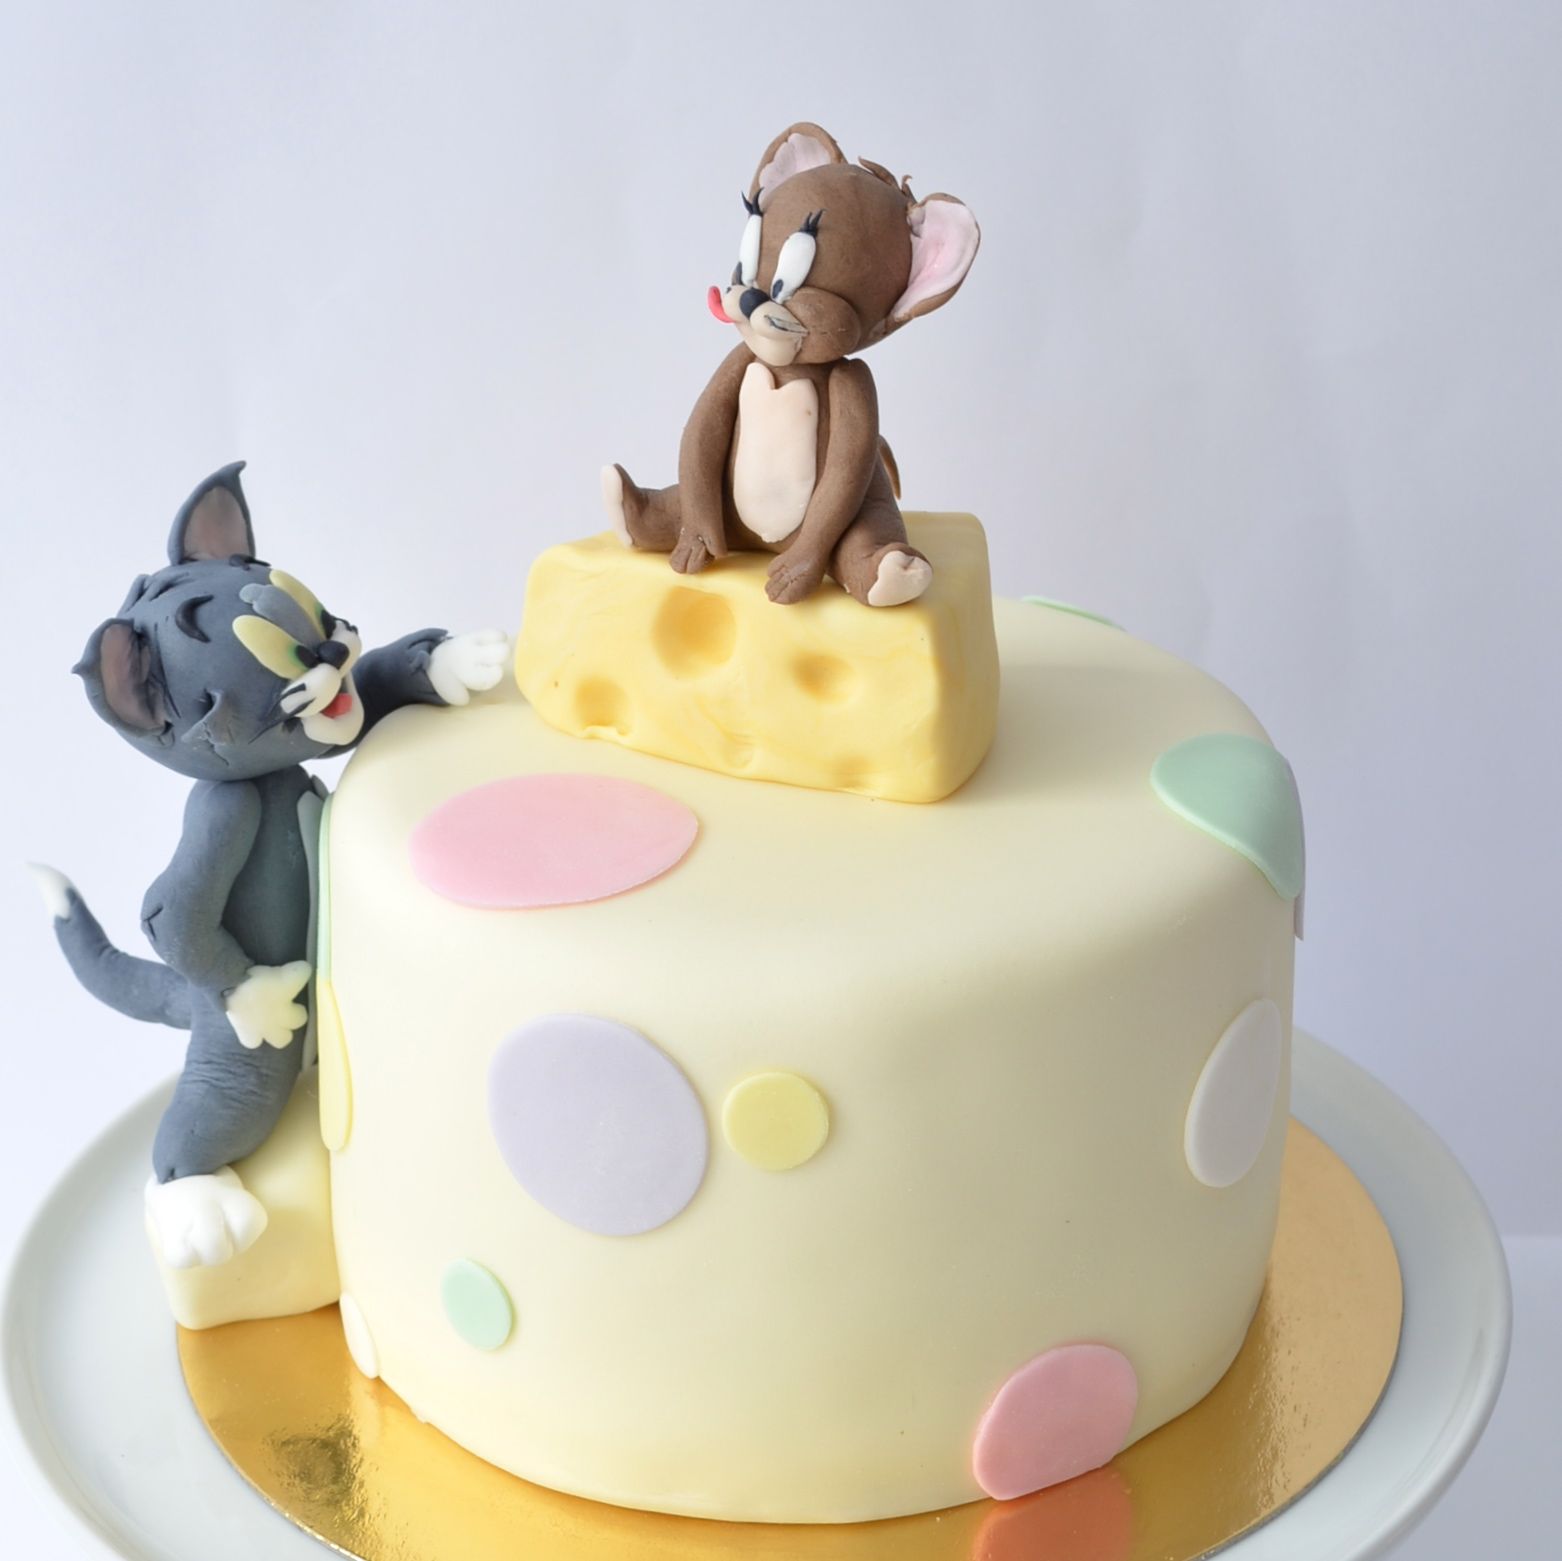 Tom And Jerry Theme Cartoon Cake, Jerry sitting on a slice of cheese